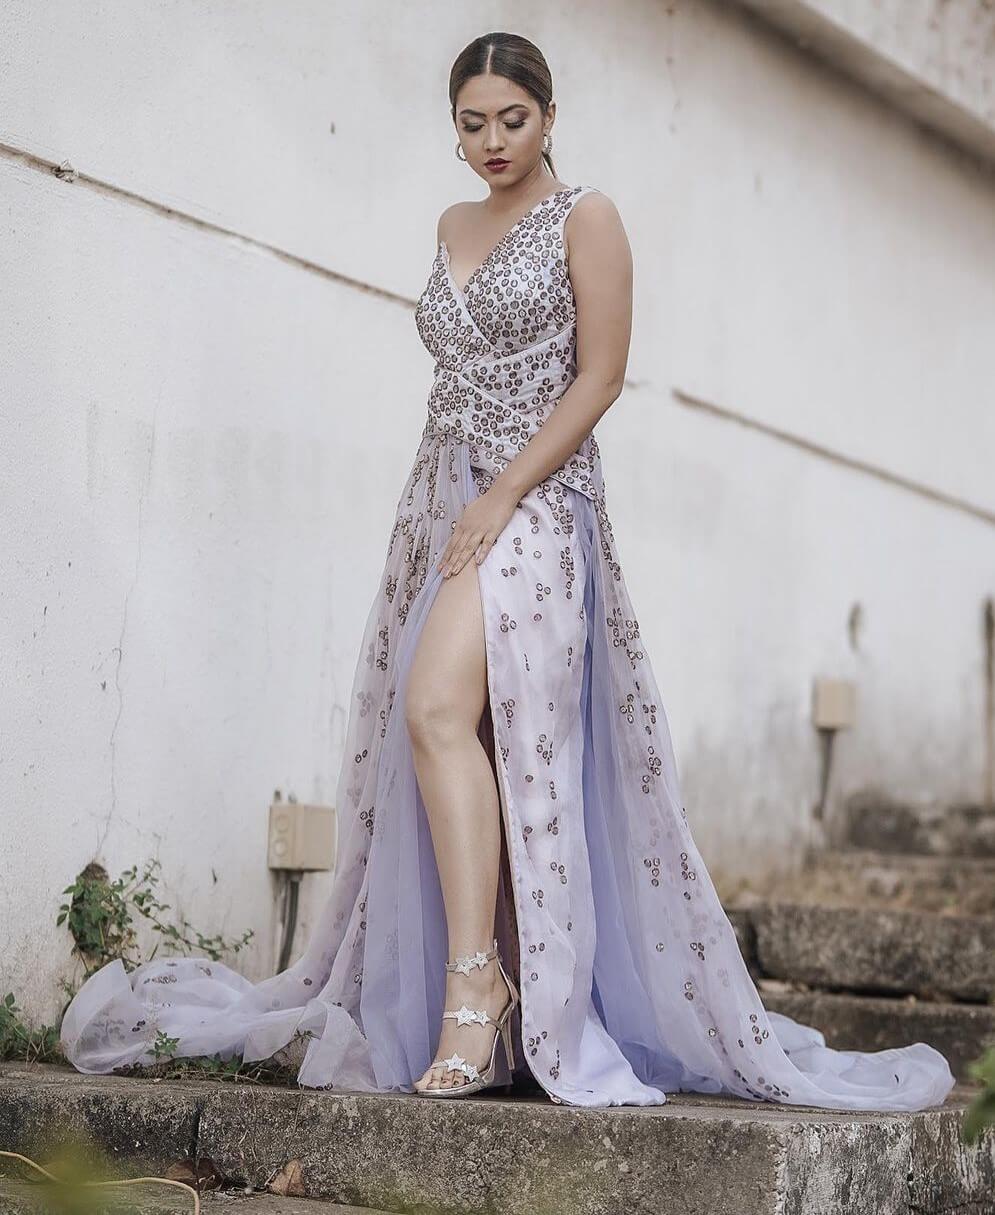 Reem Shaikh Fairly Tale Look  In Embellished Gown With Slit Cut